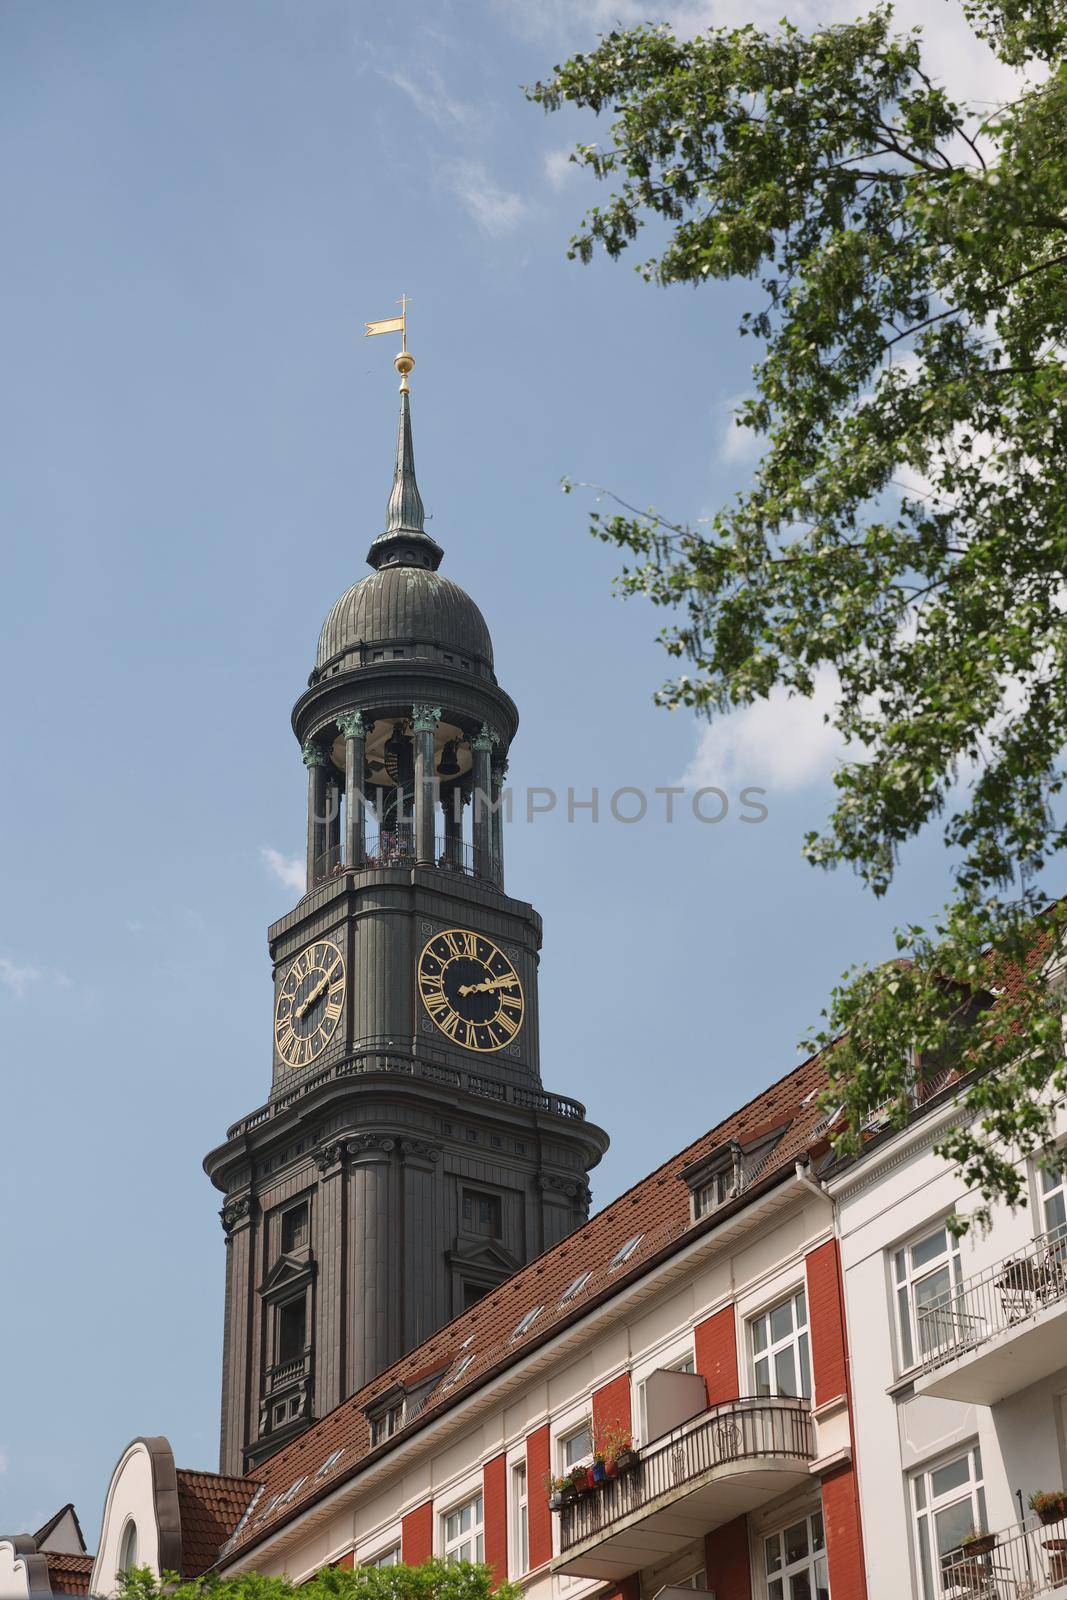 St. Michael's Church in Hamburg, Germany, (German: Hauptkirche Sankt Michaelis, colloquially called Michel) is one of Hamburg's five Lutheran main churches and the most famous church in the city by wondry